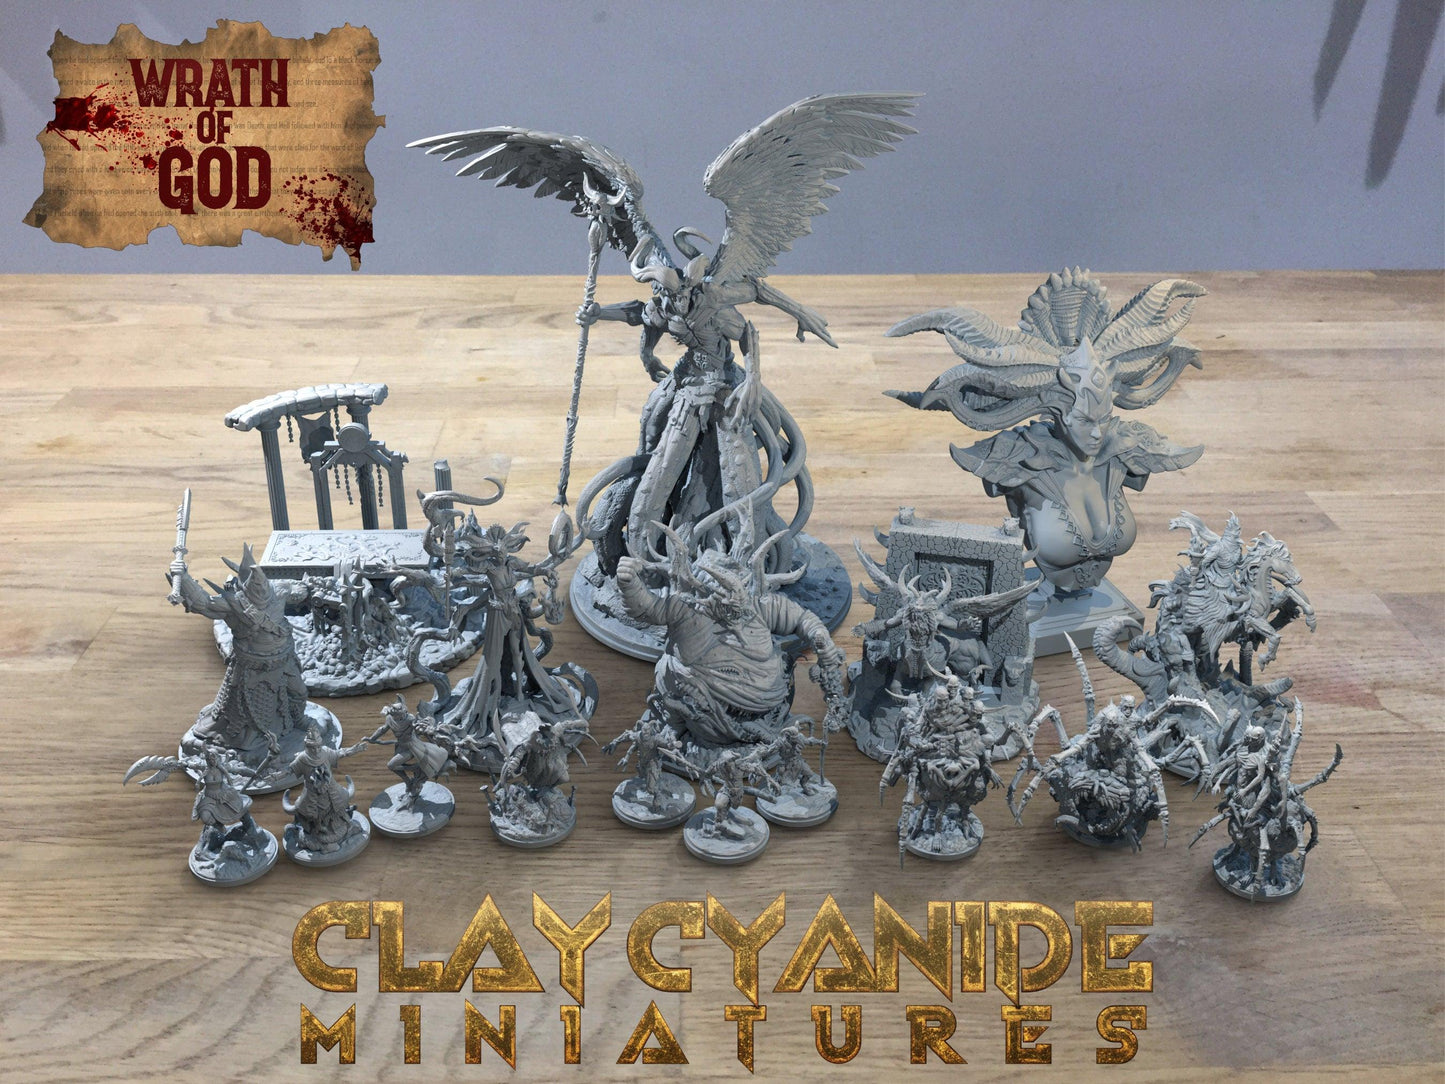 Plague Crawlers miniatures | Clay Cyanide | Wrath of God | 3 Types | Tabletop Gaming | DnD Miniature | Dungeons and Dragons DnD 5e - Plague Miniatures shop for DnD Miniatures